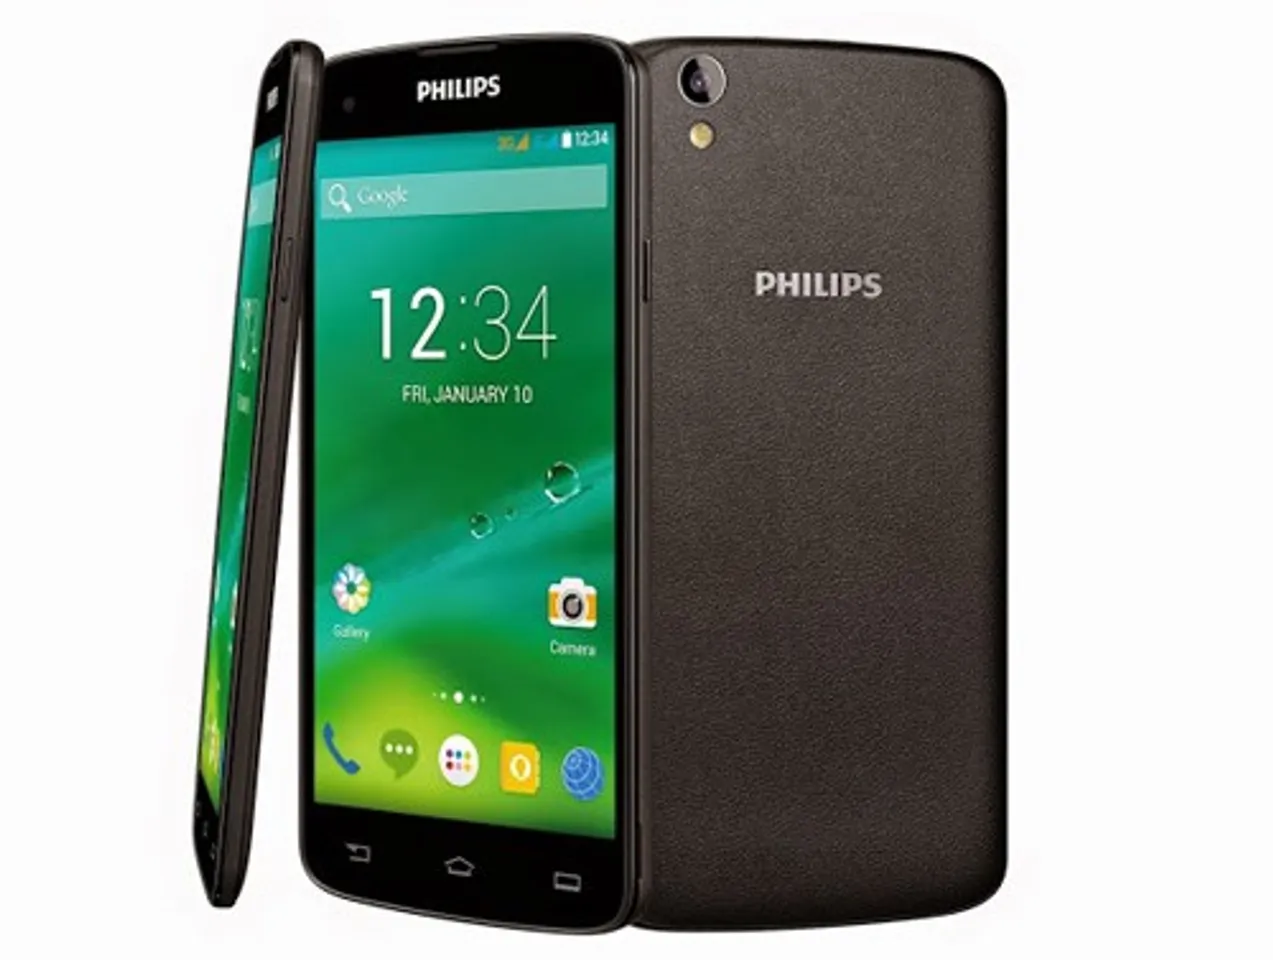 Philips launches high performance Xenium I908 smartphone in the India Market